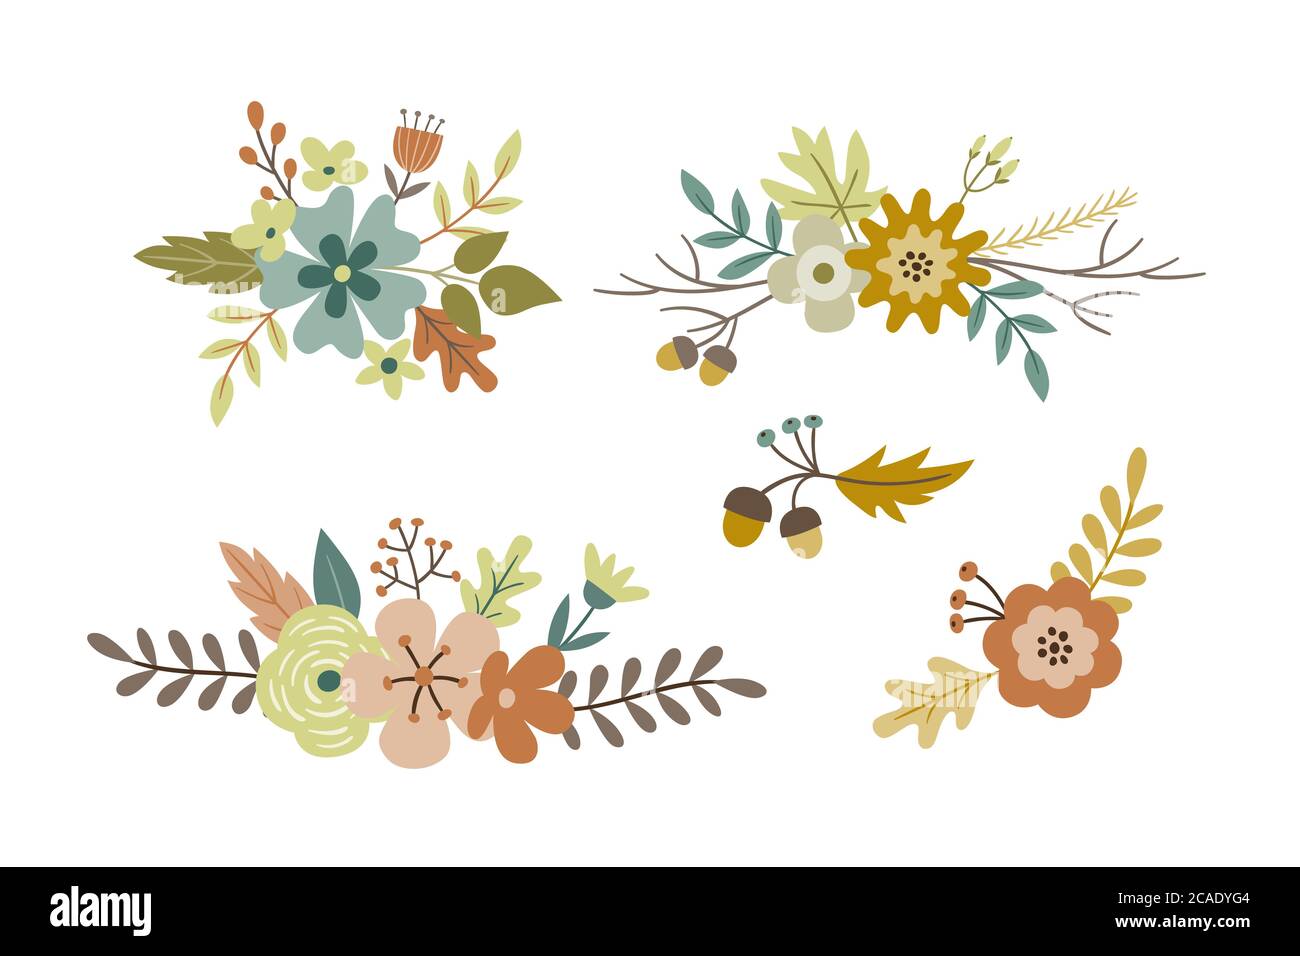 Vintage floral decoration for autumn. Isolated elements. Hand drawn vector illustration. Stock Vector